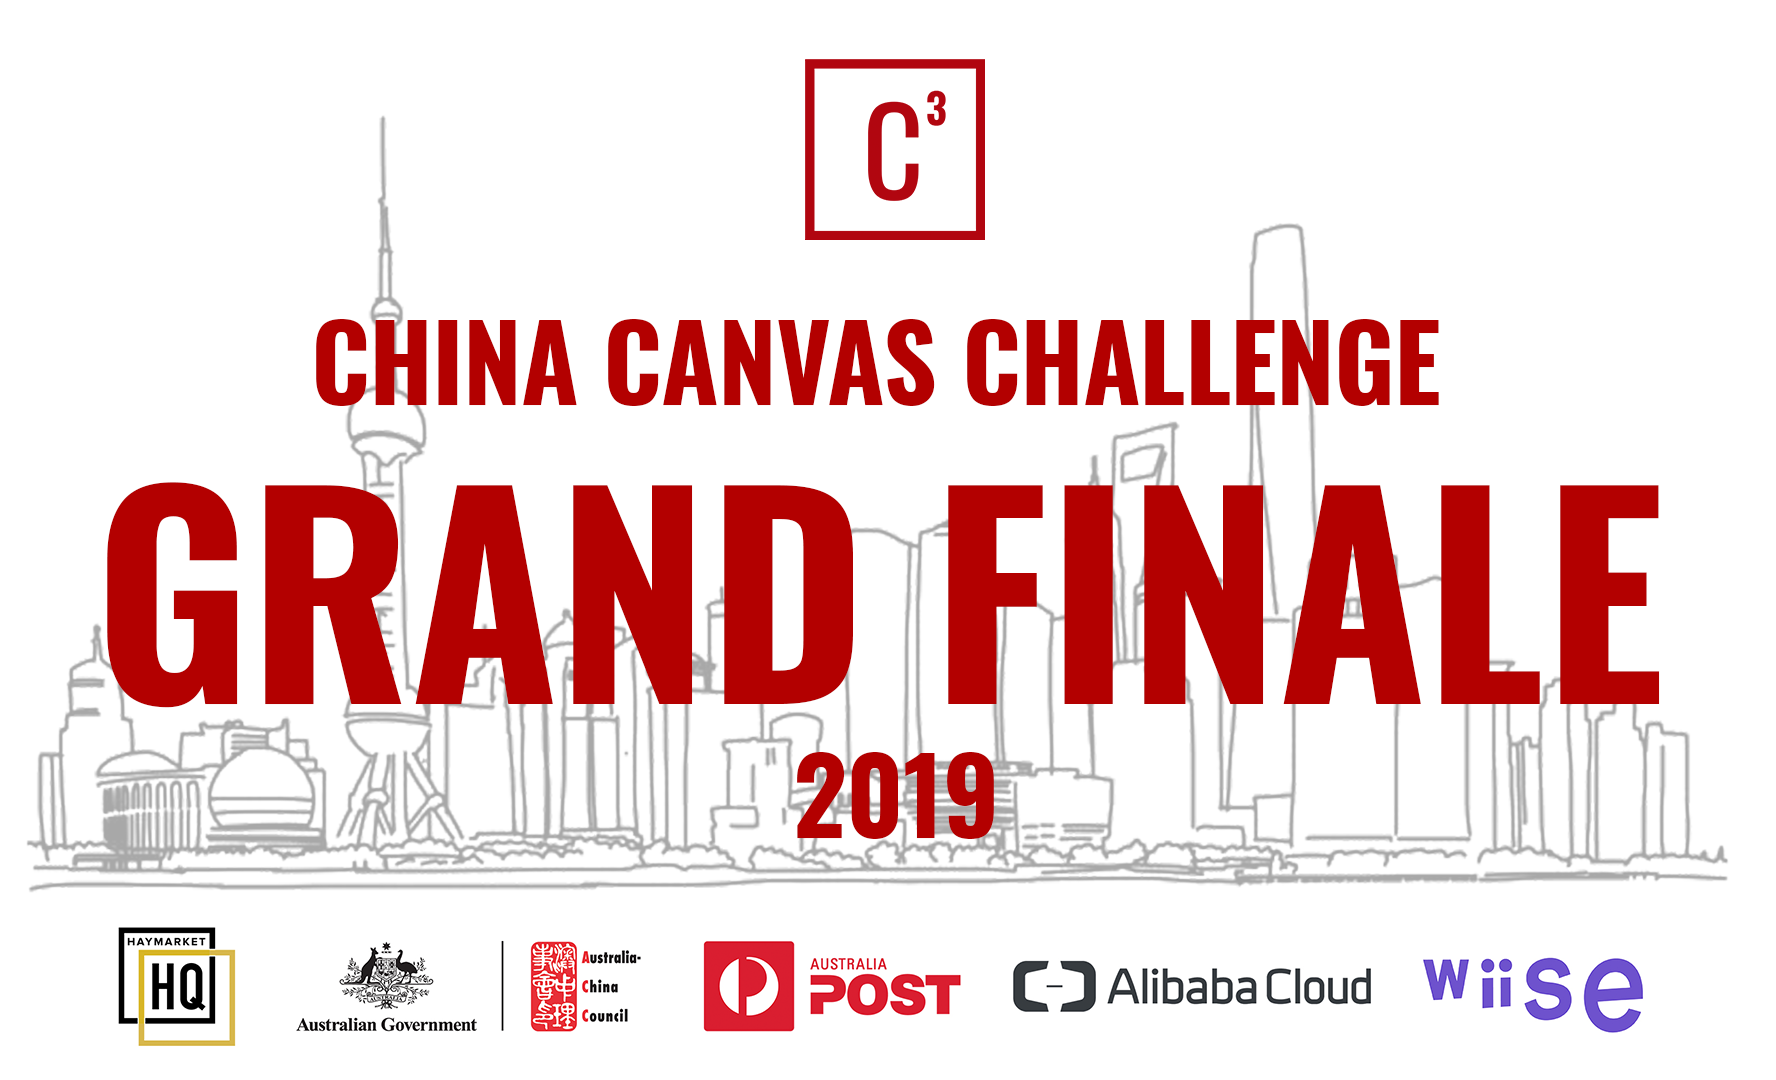 Asia Advisory in final round pitch for China Canvas Challenge